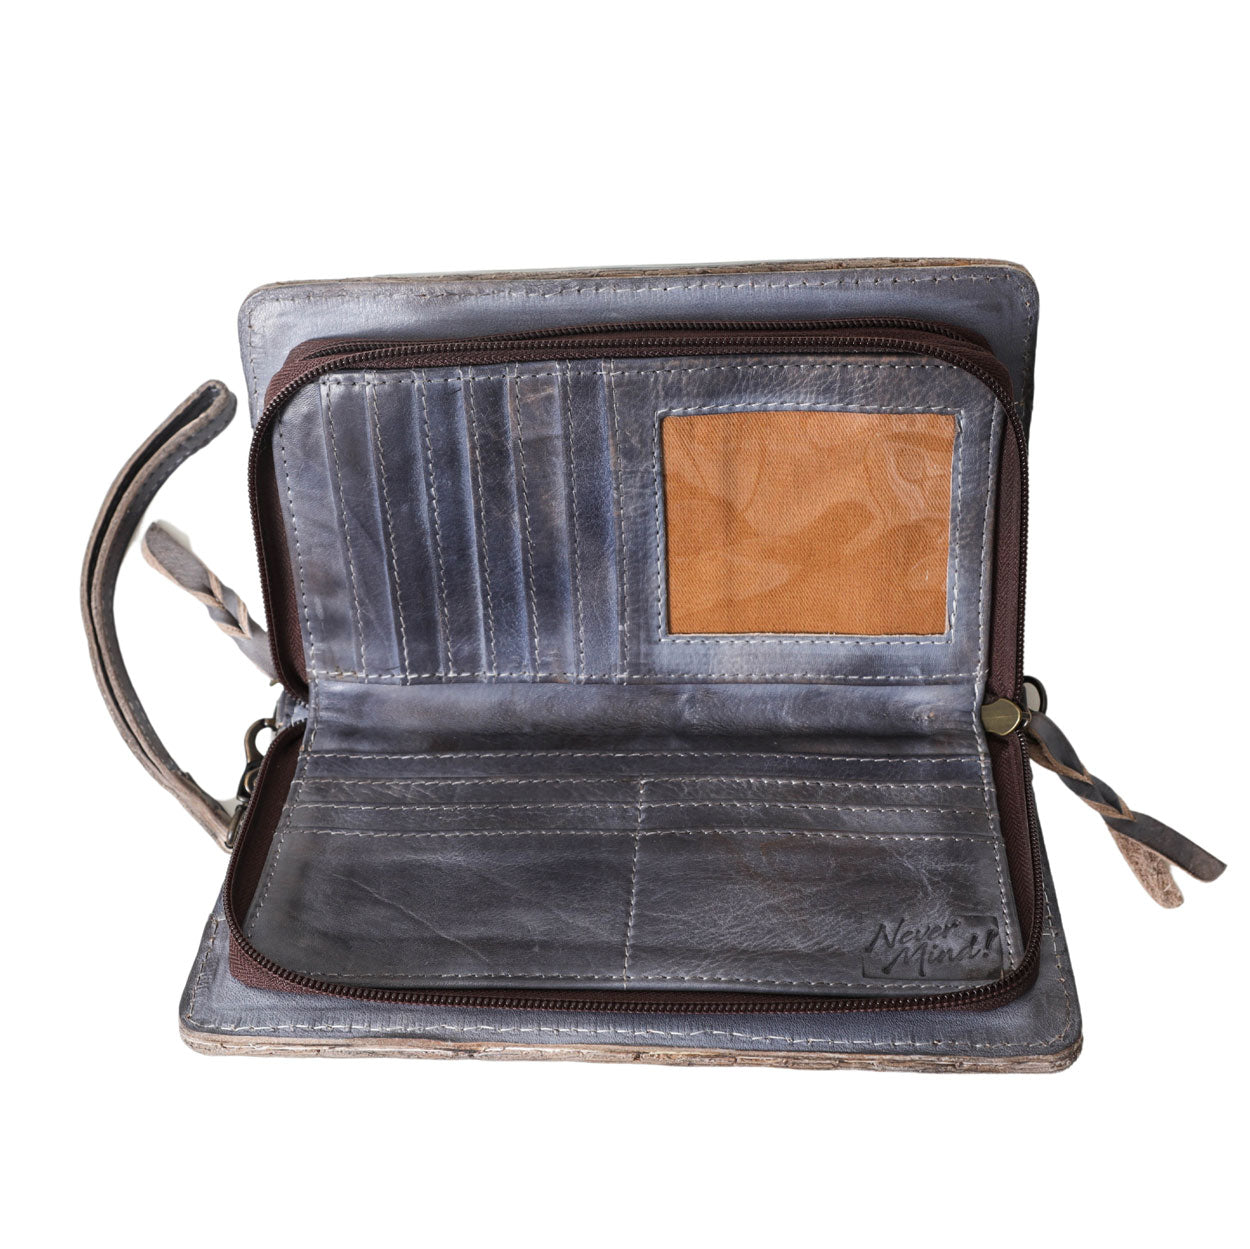 Antiqued Blue Organzier/Crossbody by Never Mind